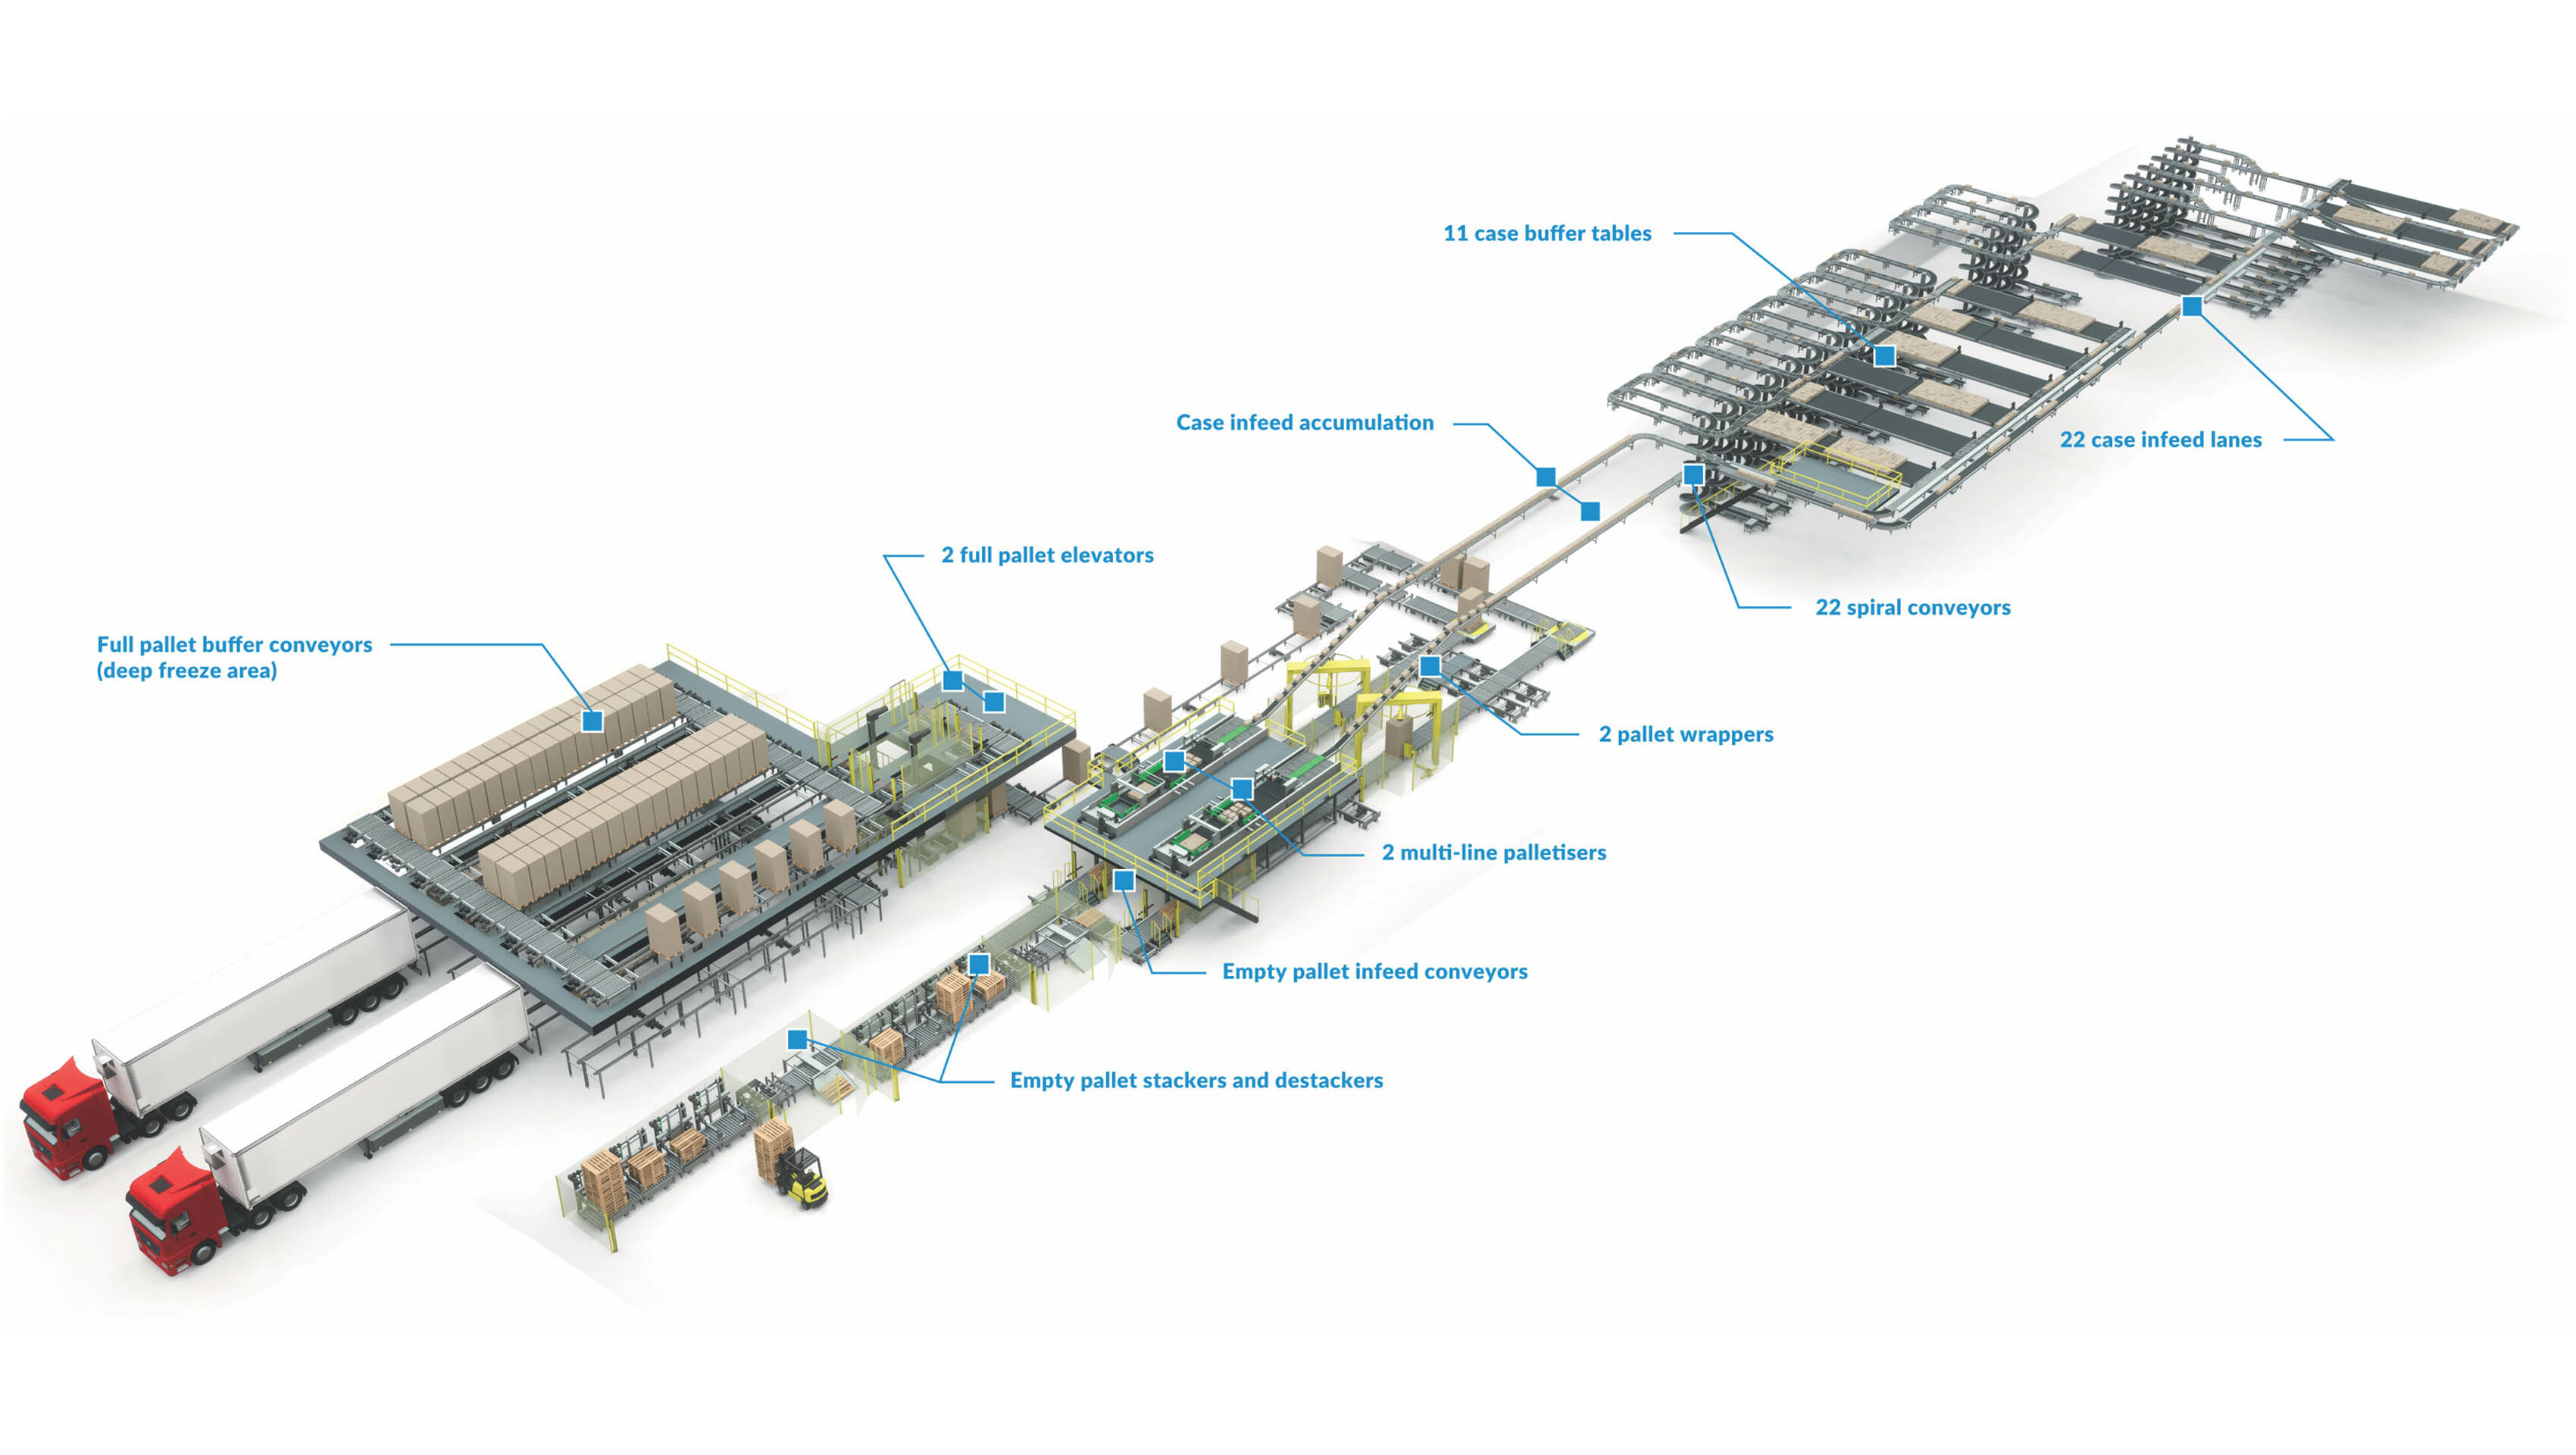 Multi-line palletising system handling cases from 22 production lines